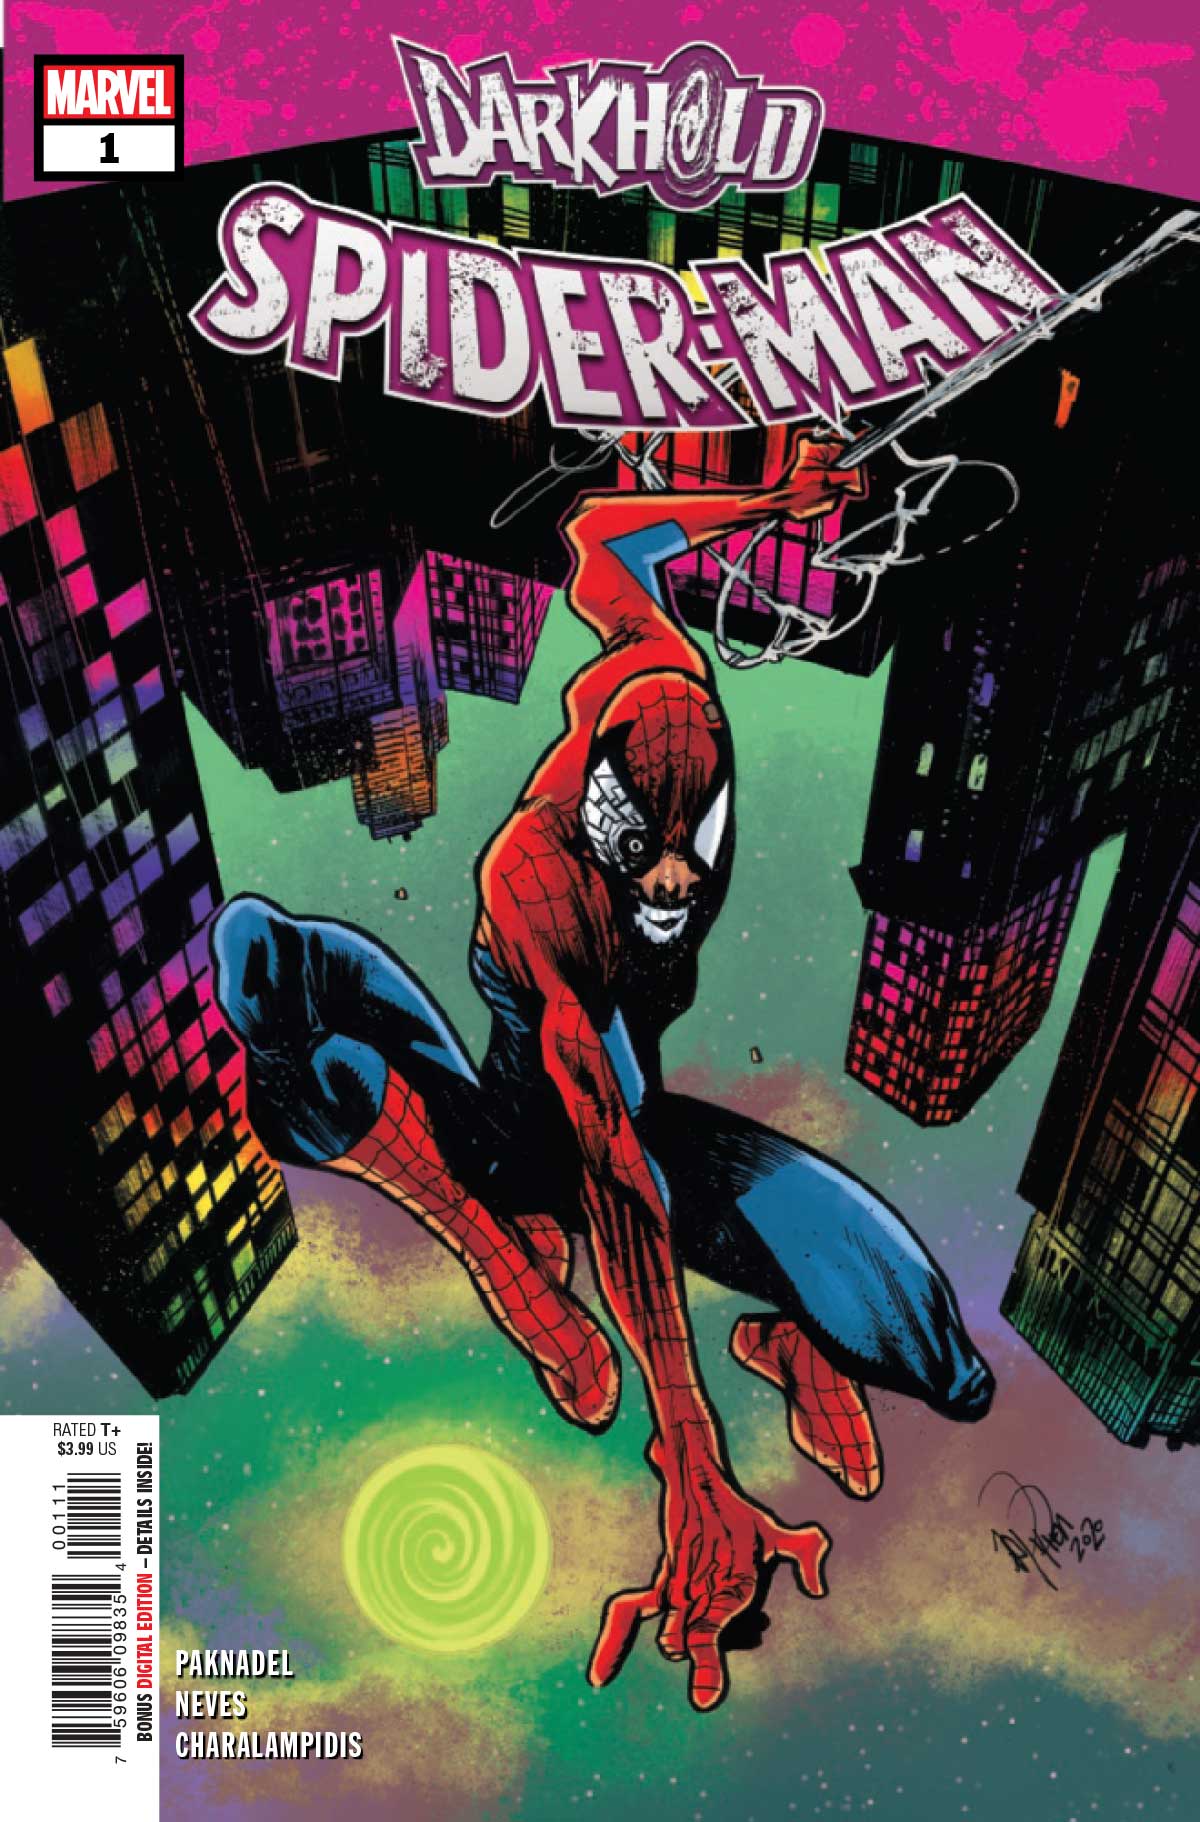 Spider-Boy gets own series — Major Spoilers — Comic Book Reviews, News,  Previews, and Podcasts